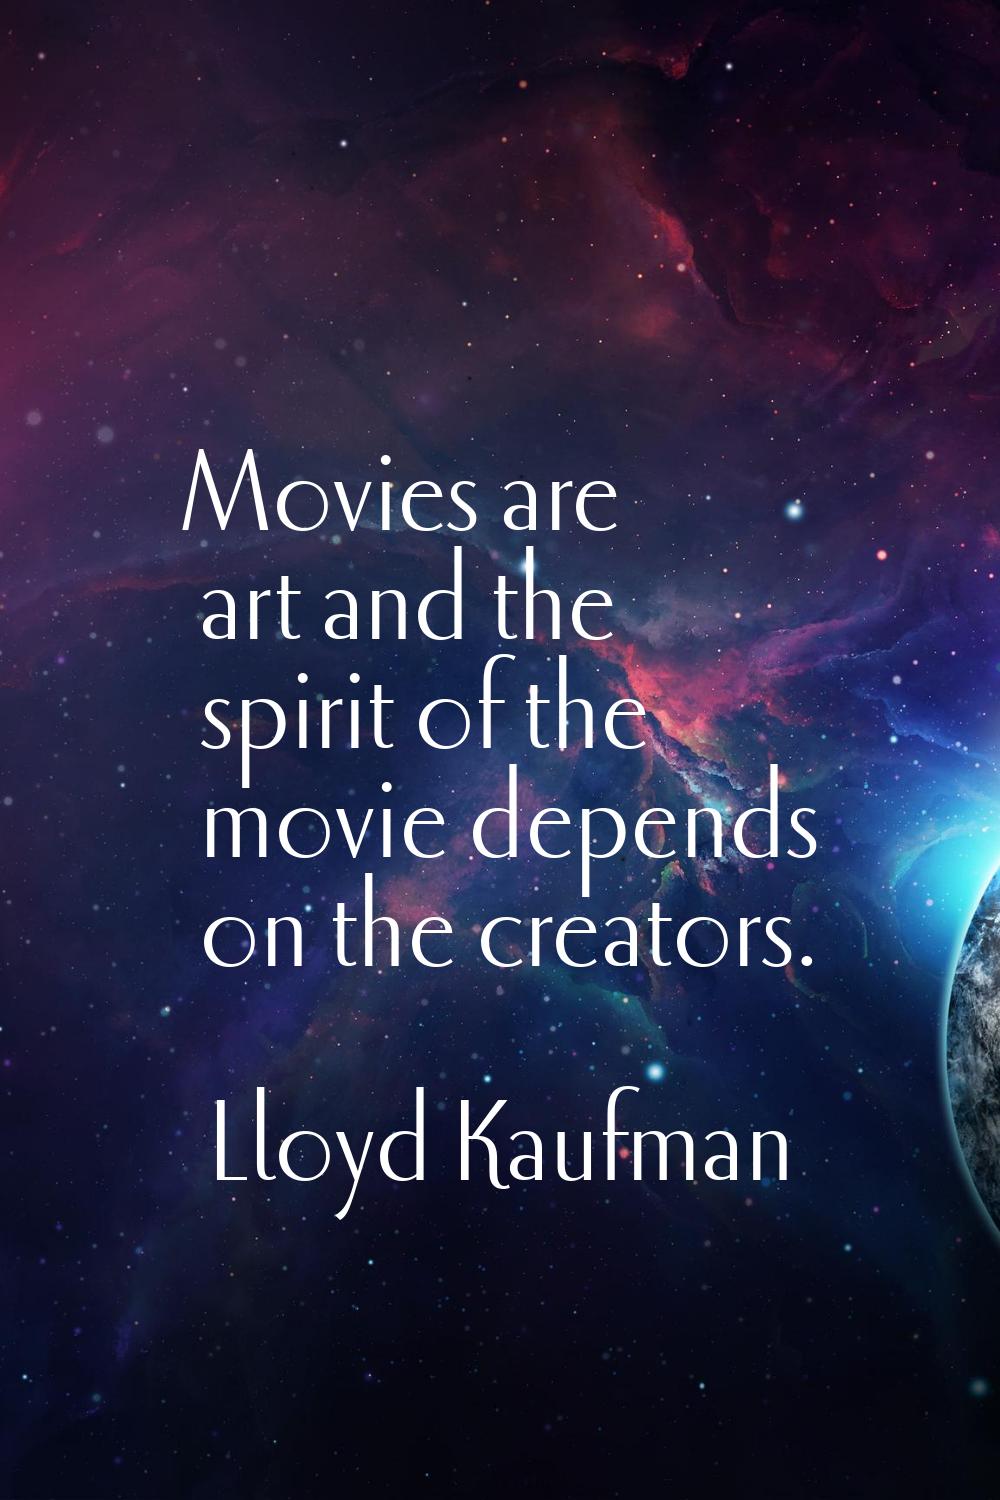 Movies are art and the spirit of the movie depends on the creators.